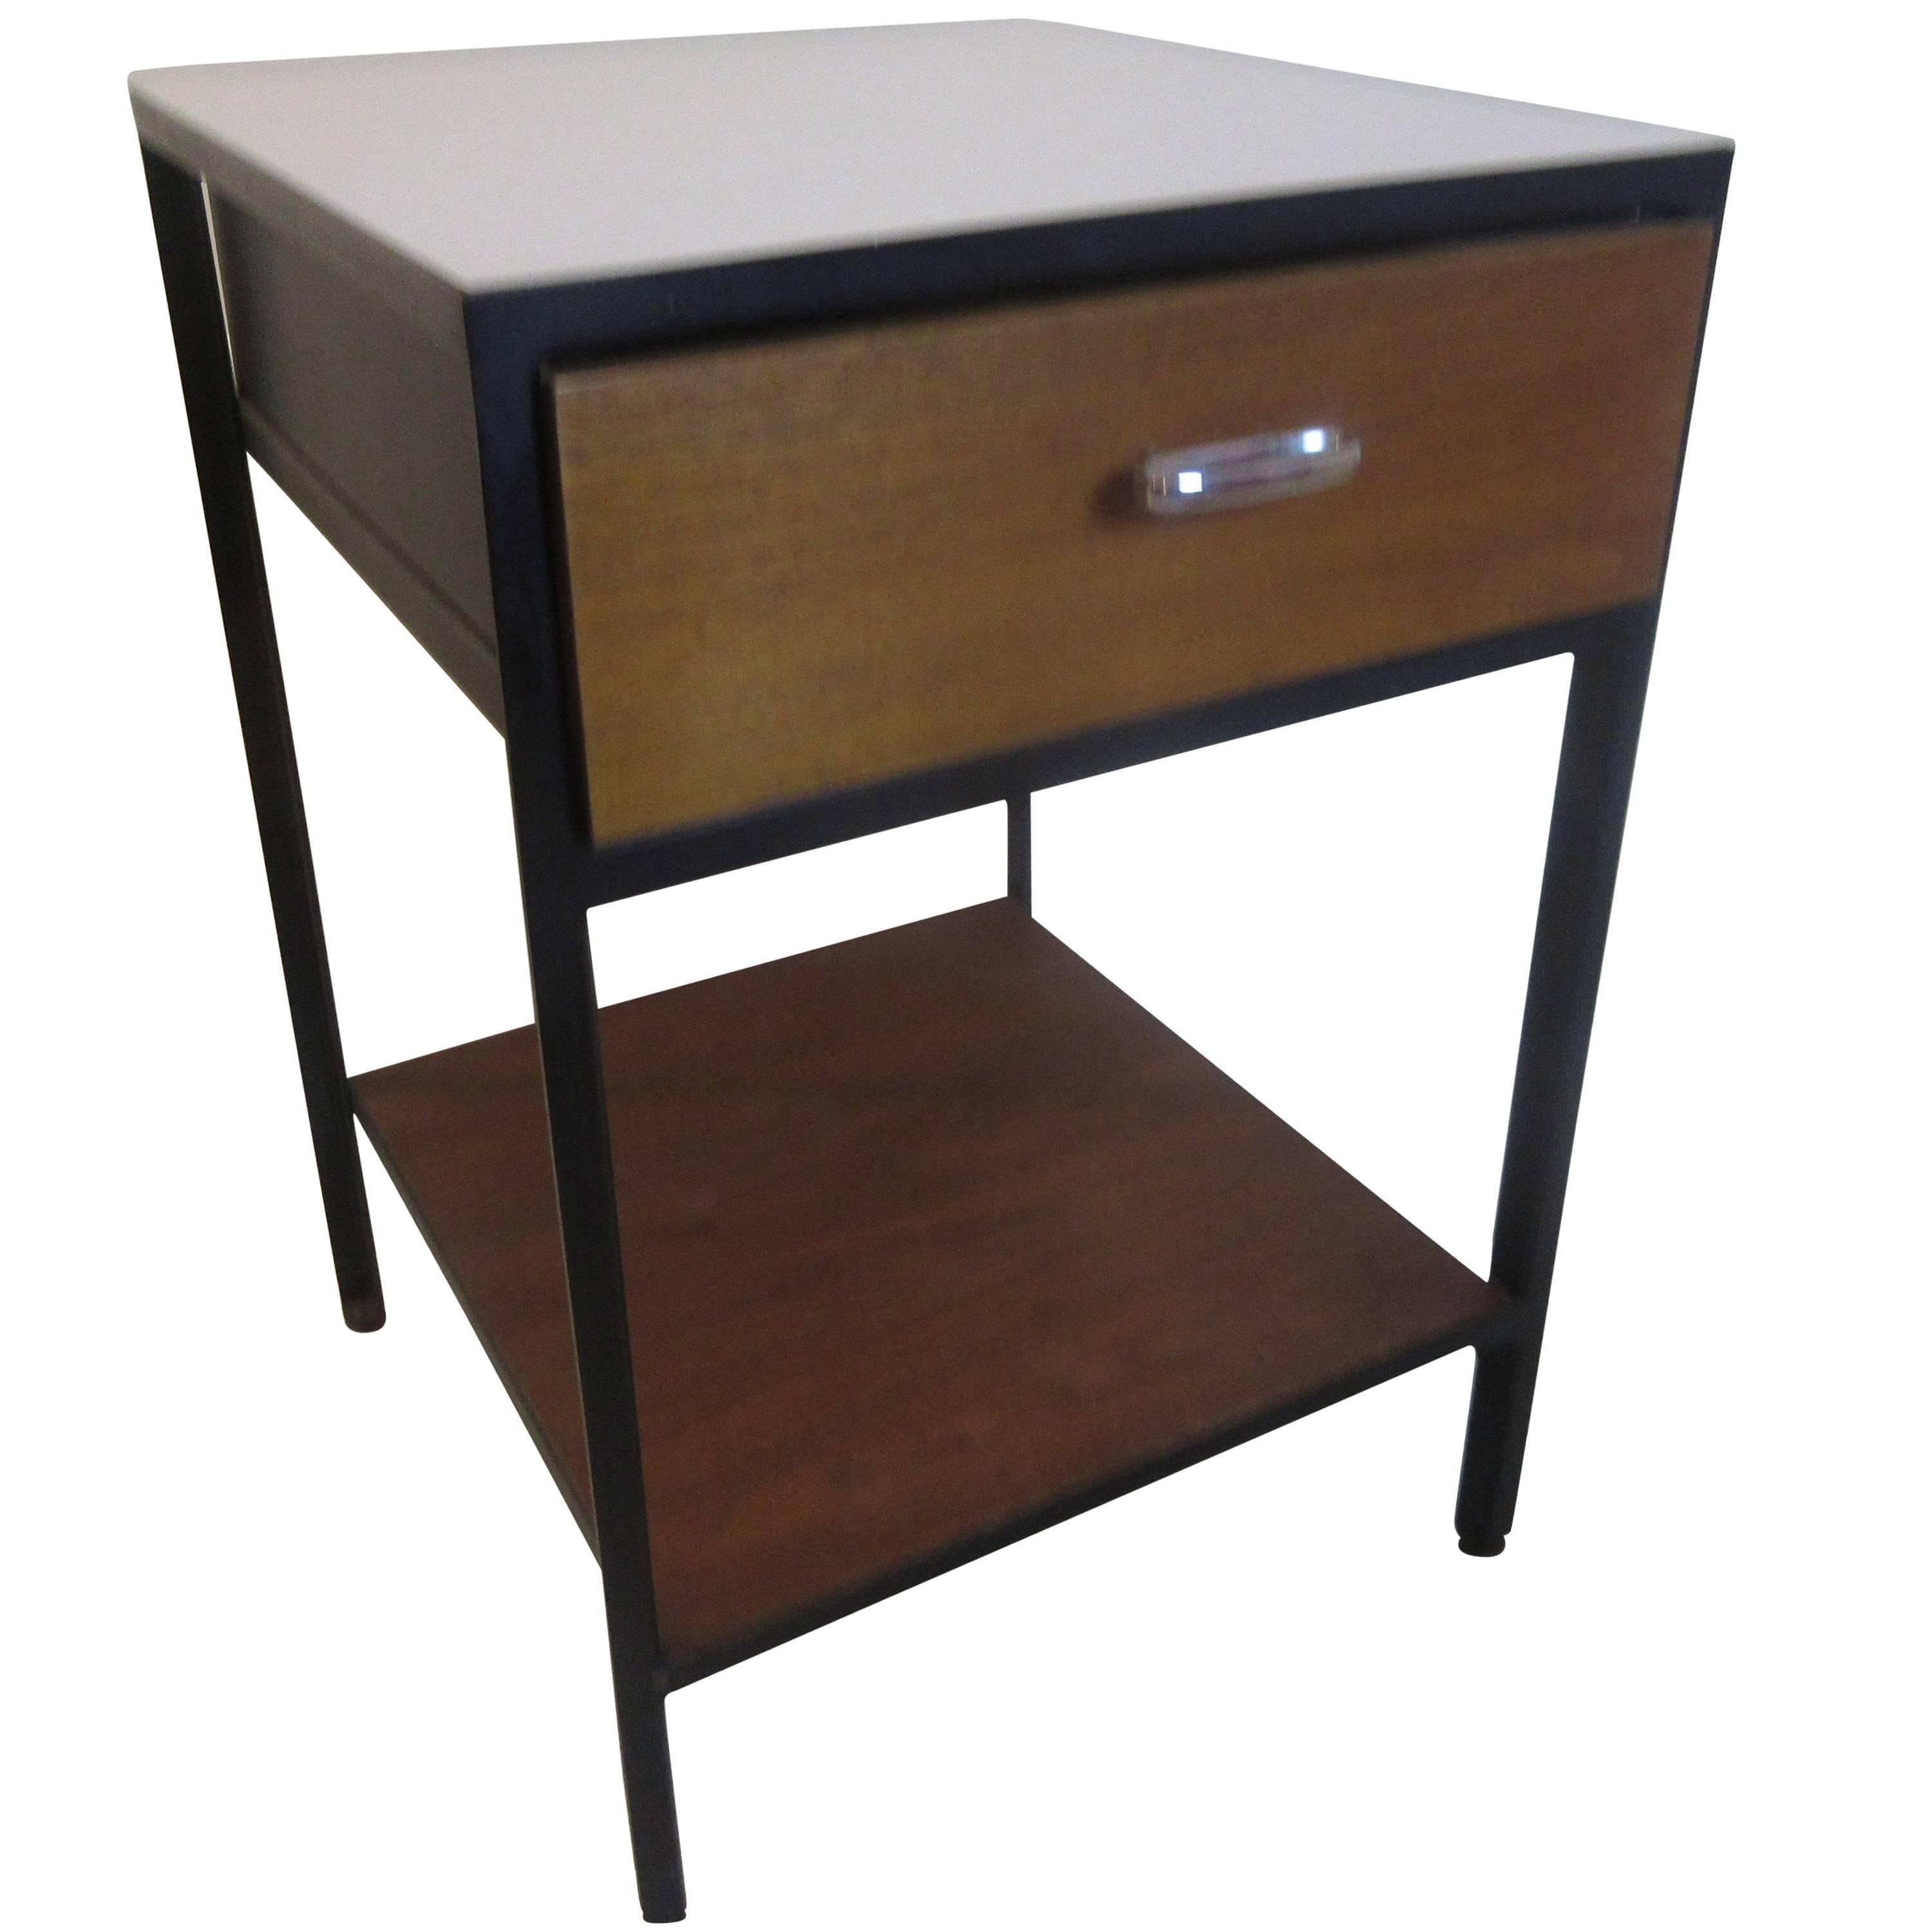 George Nelson for Herman Miller Steel Case Nightstand in Walnut and Black